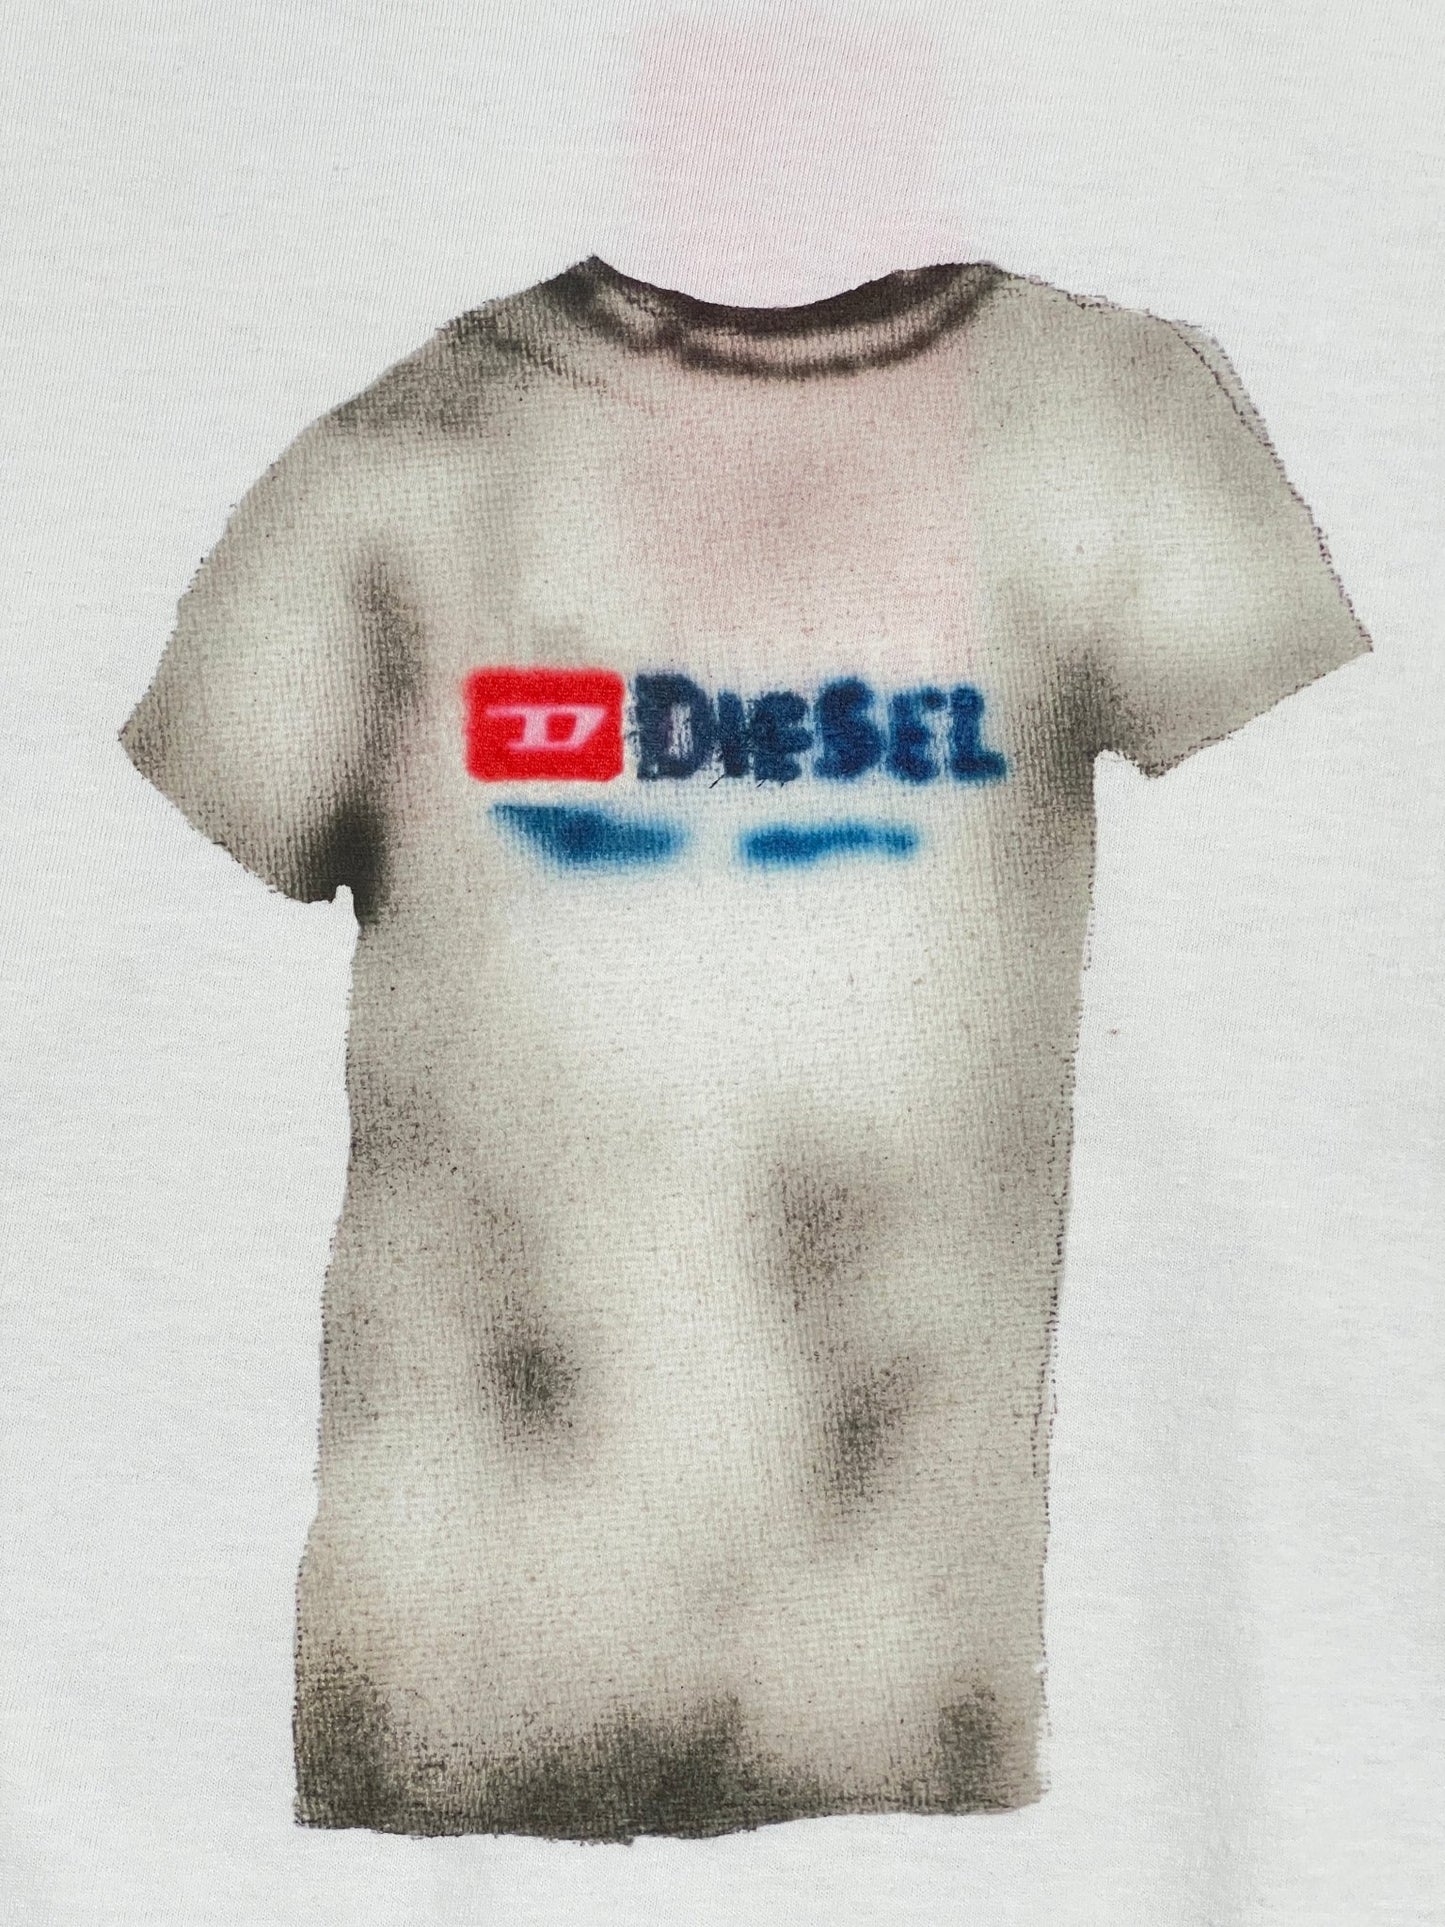 Graphic DIESEL T-BOXT-N12 T-SHIRT WHITE with a digital print of a YouTube-inspired logo and simulated body contours design.